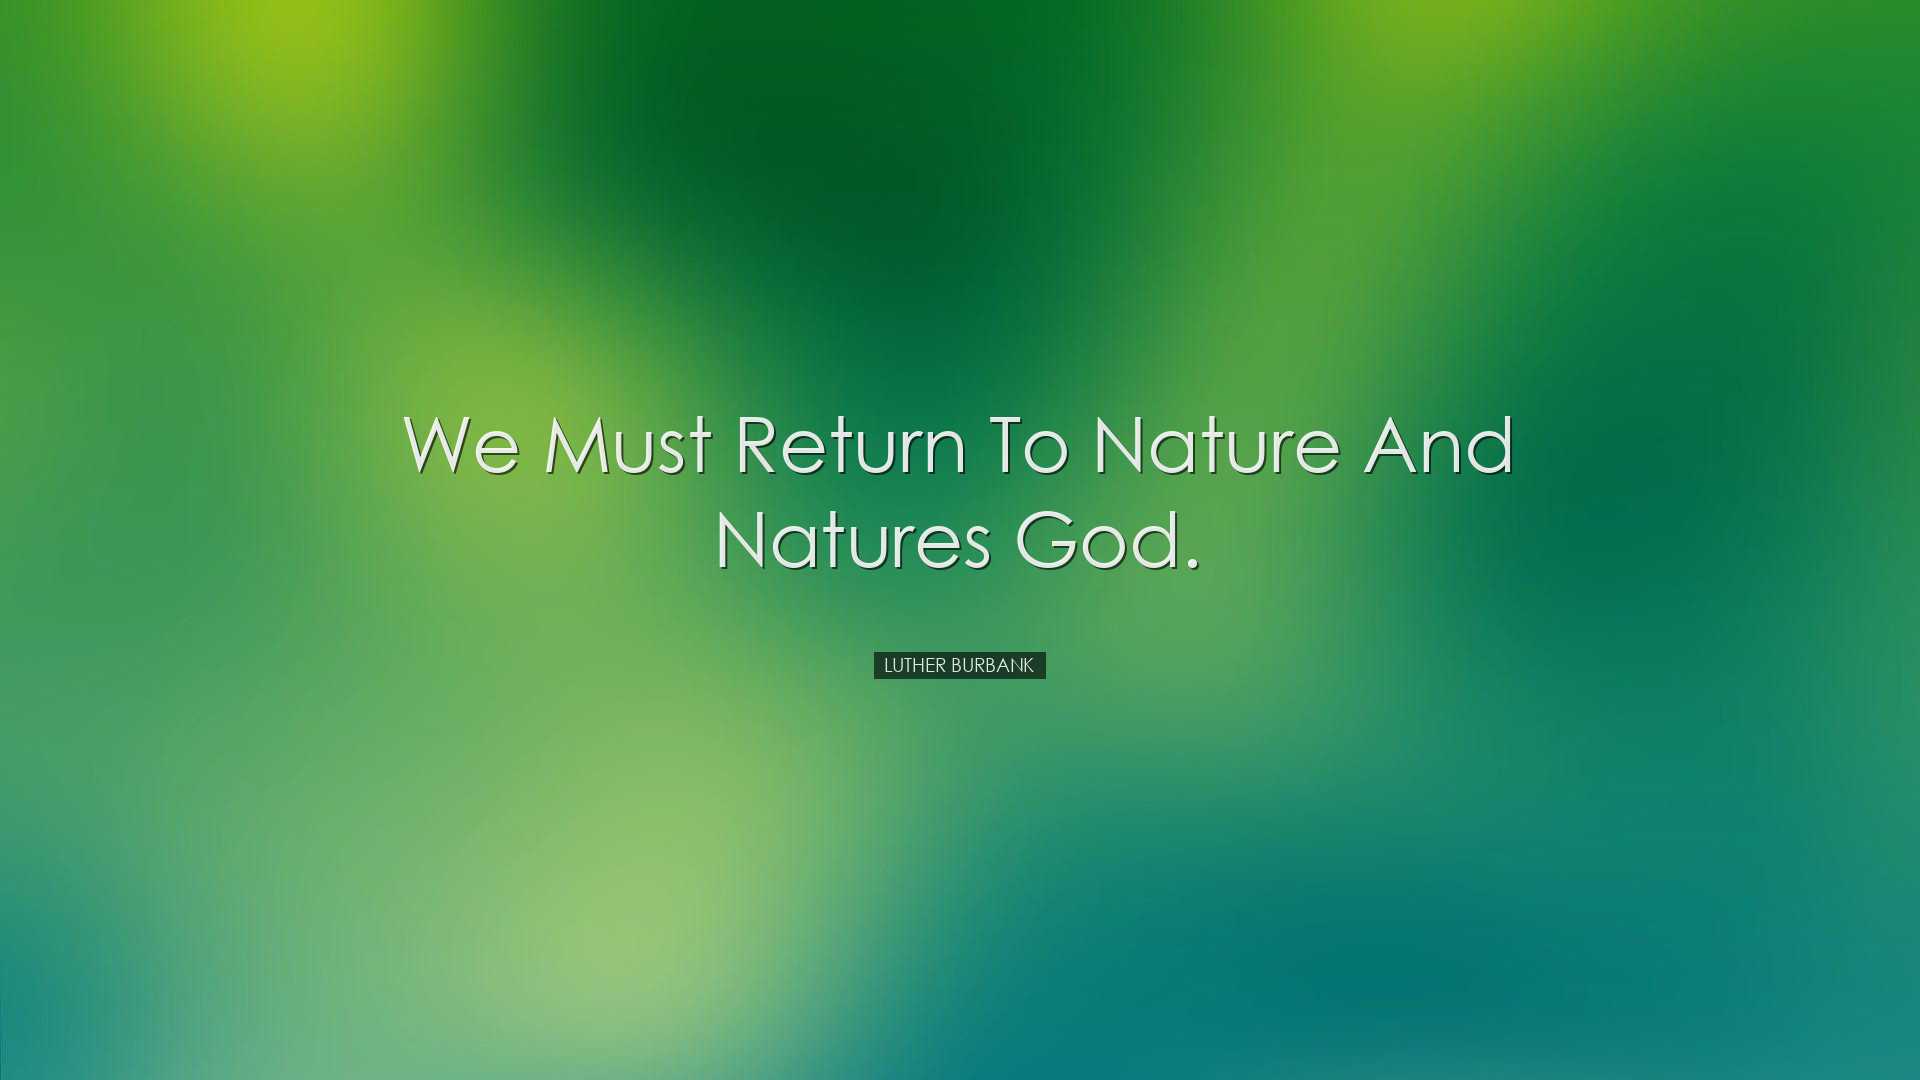 We must return to nature and natures god. - Luther Burbank